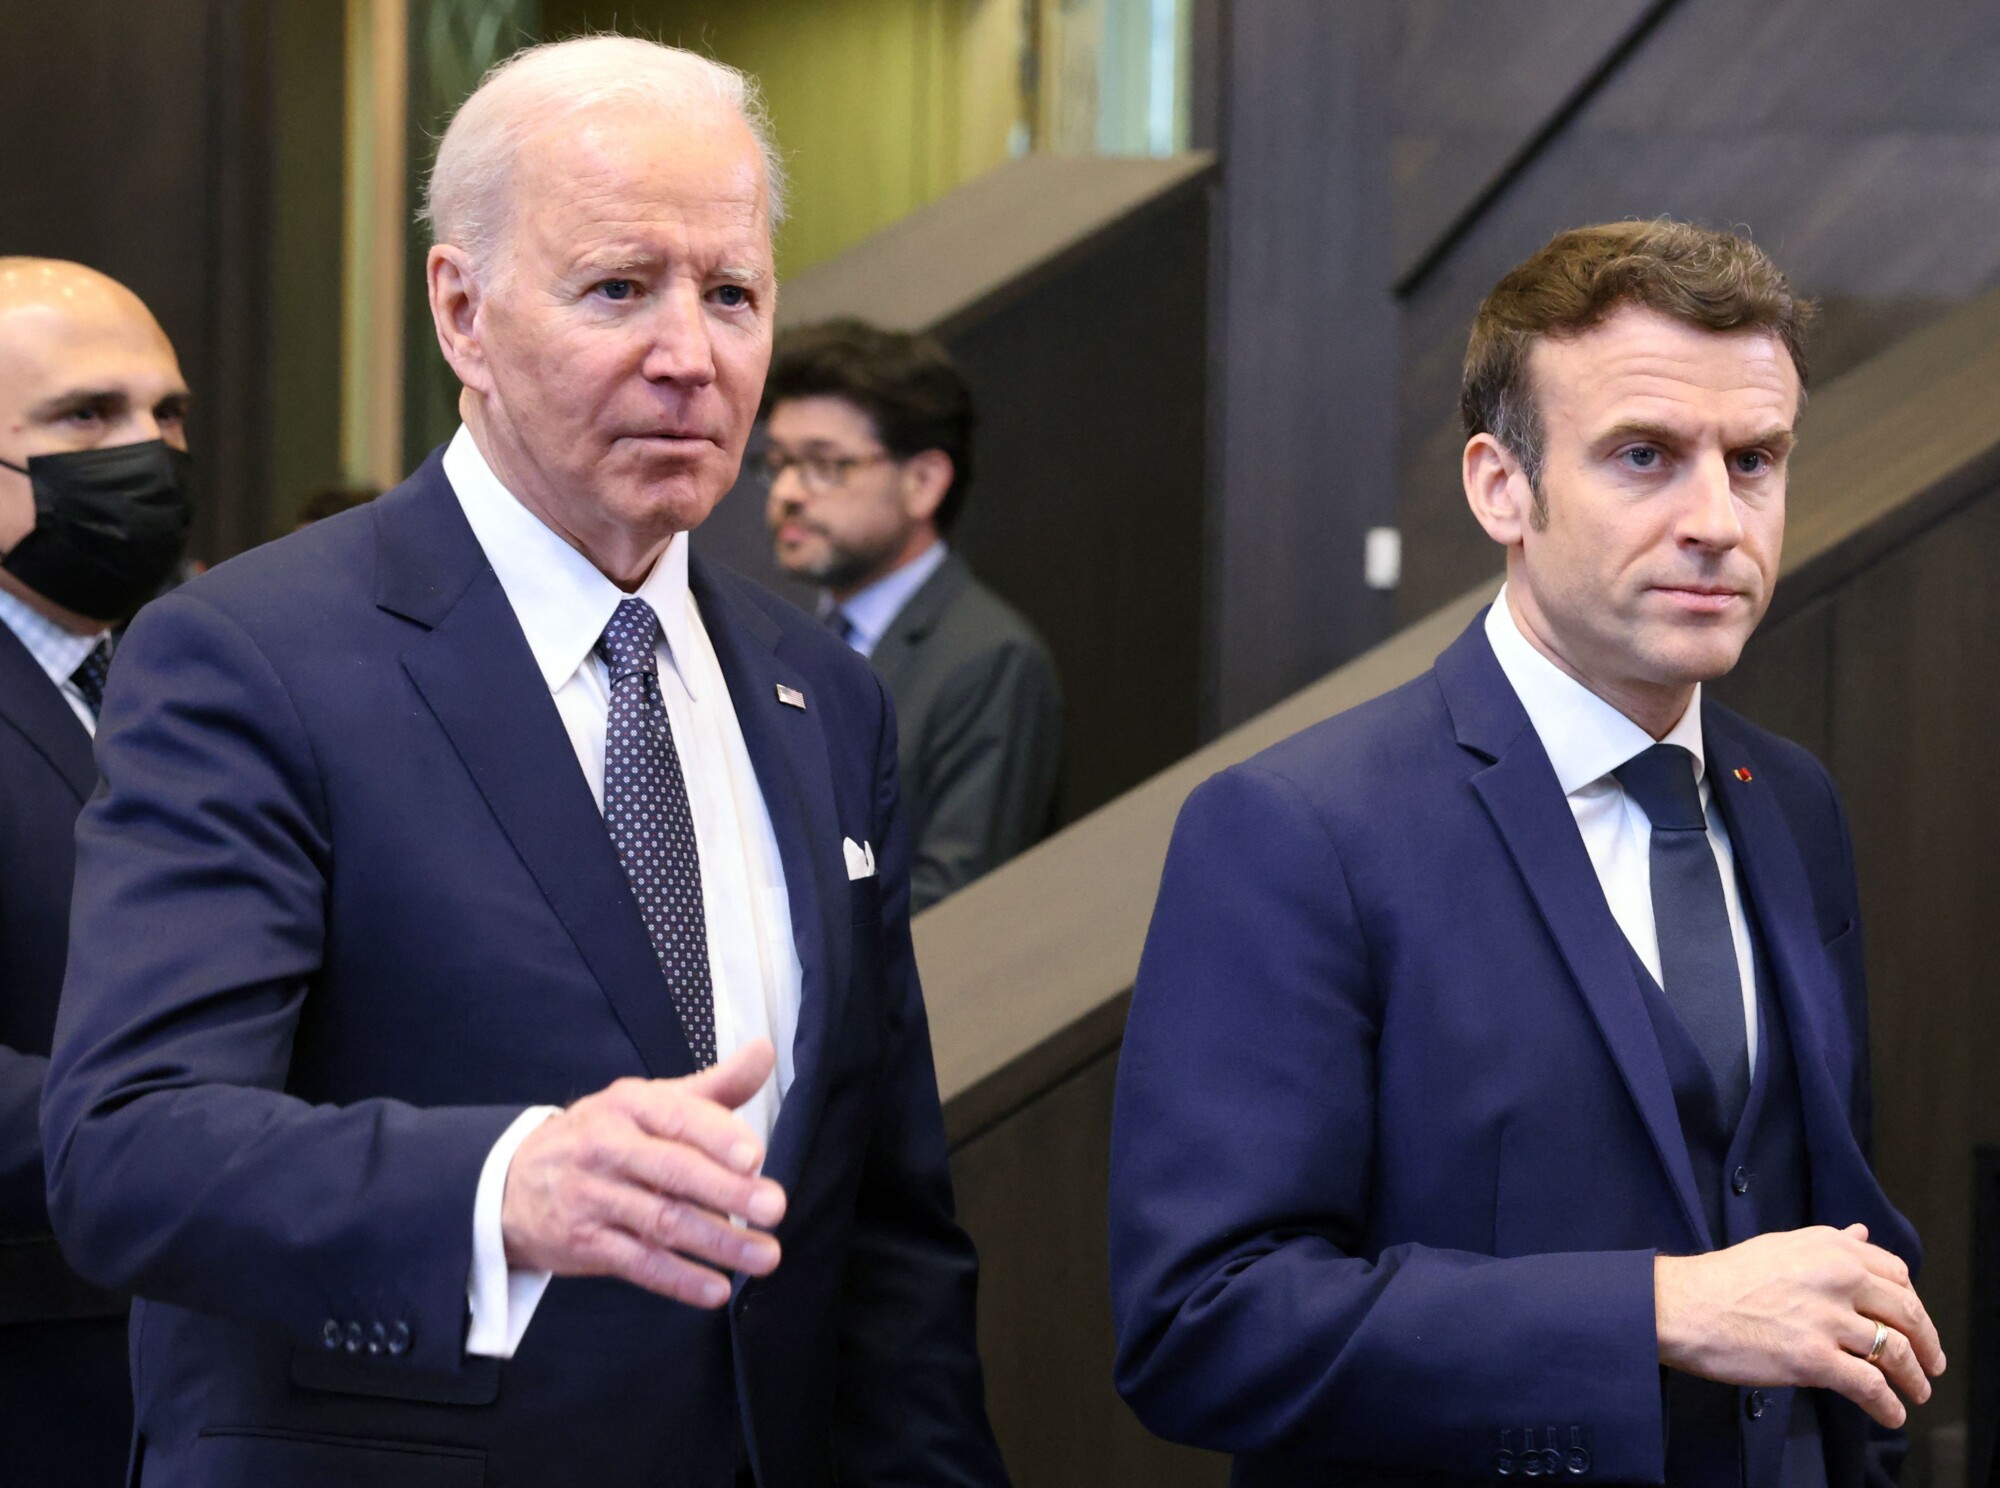 LIVE: Biden and First Lady Greet President Macron and Mrs. Macron of France